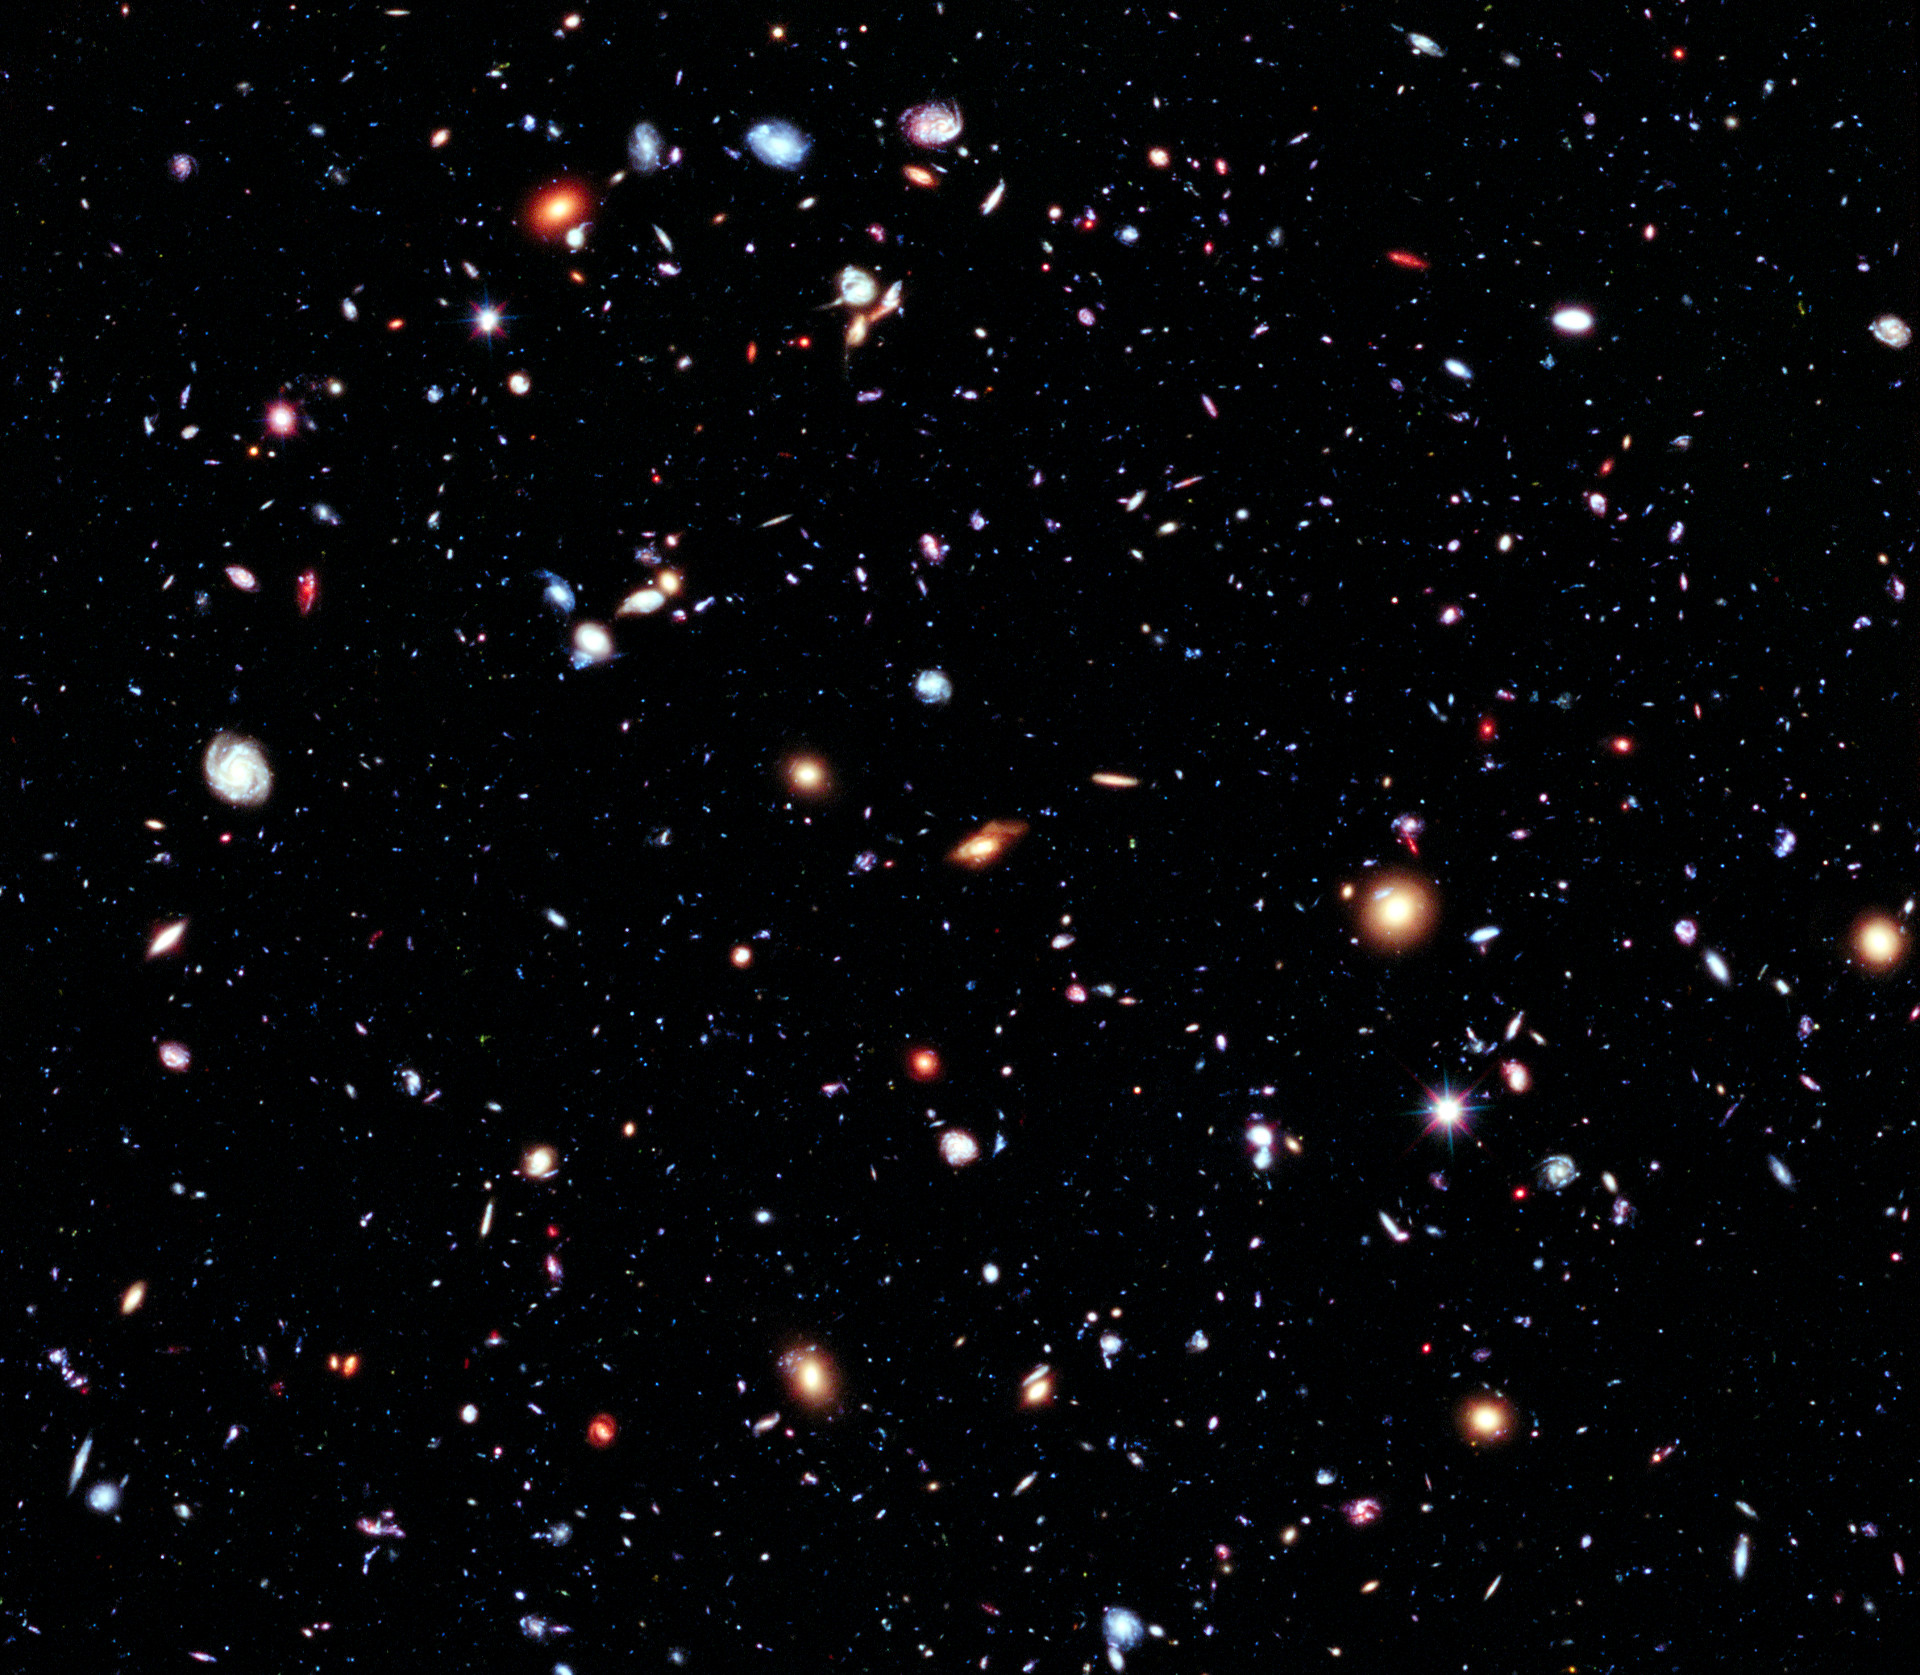 Hubble Extreme Deep Field image (2012)